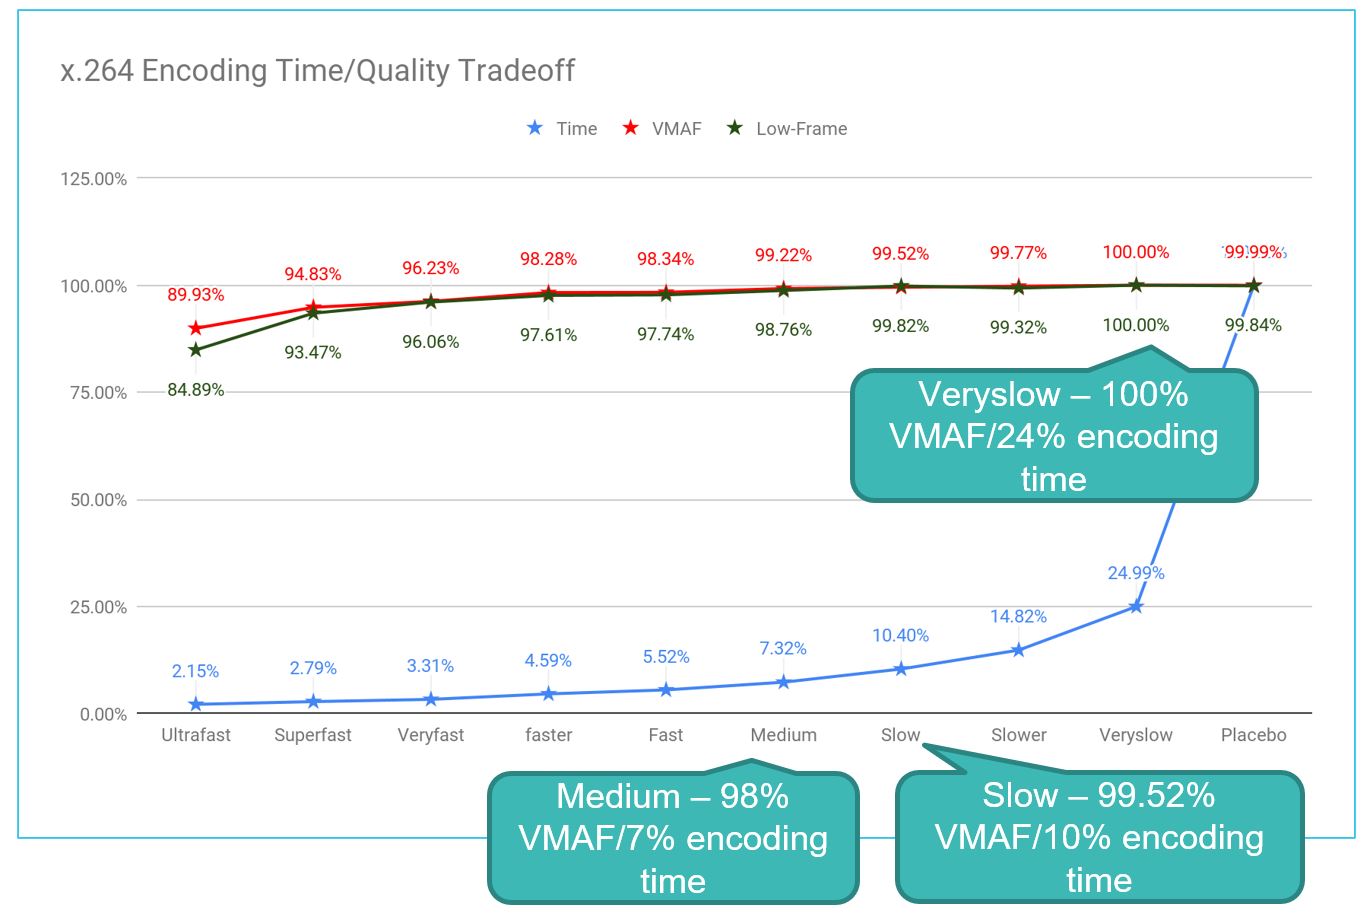 This chart illustrates the quality/encoding time tradeoffs associated with x264 presets.